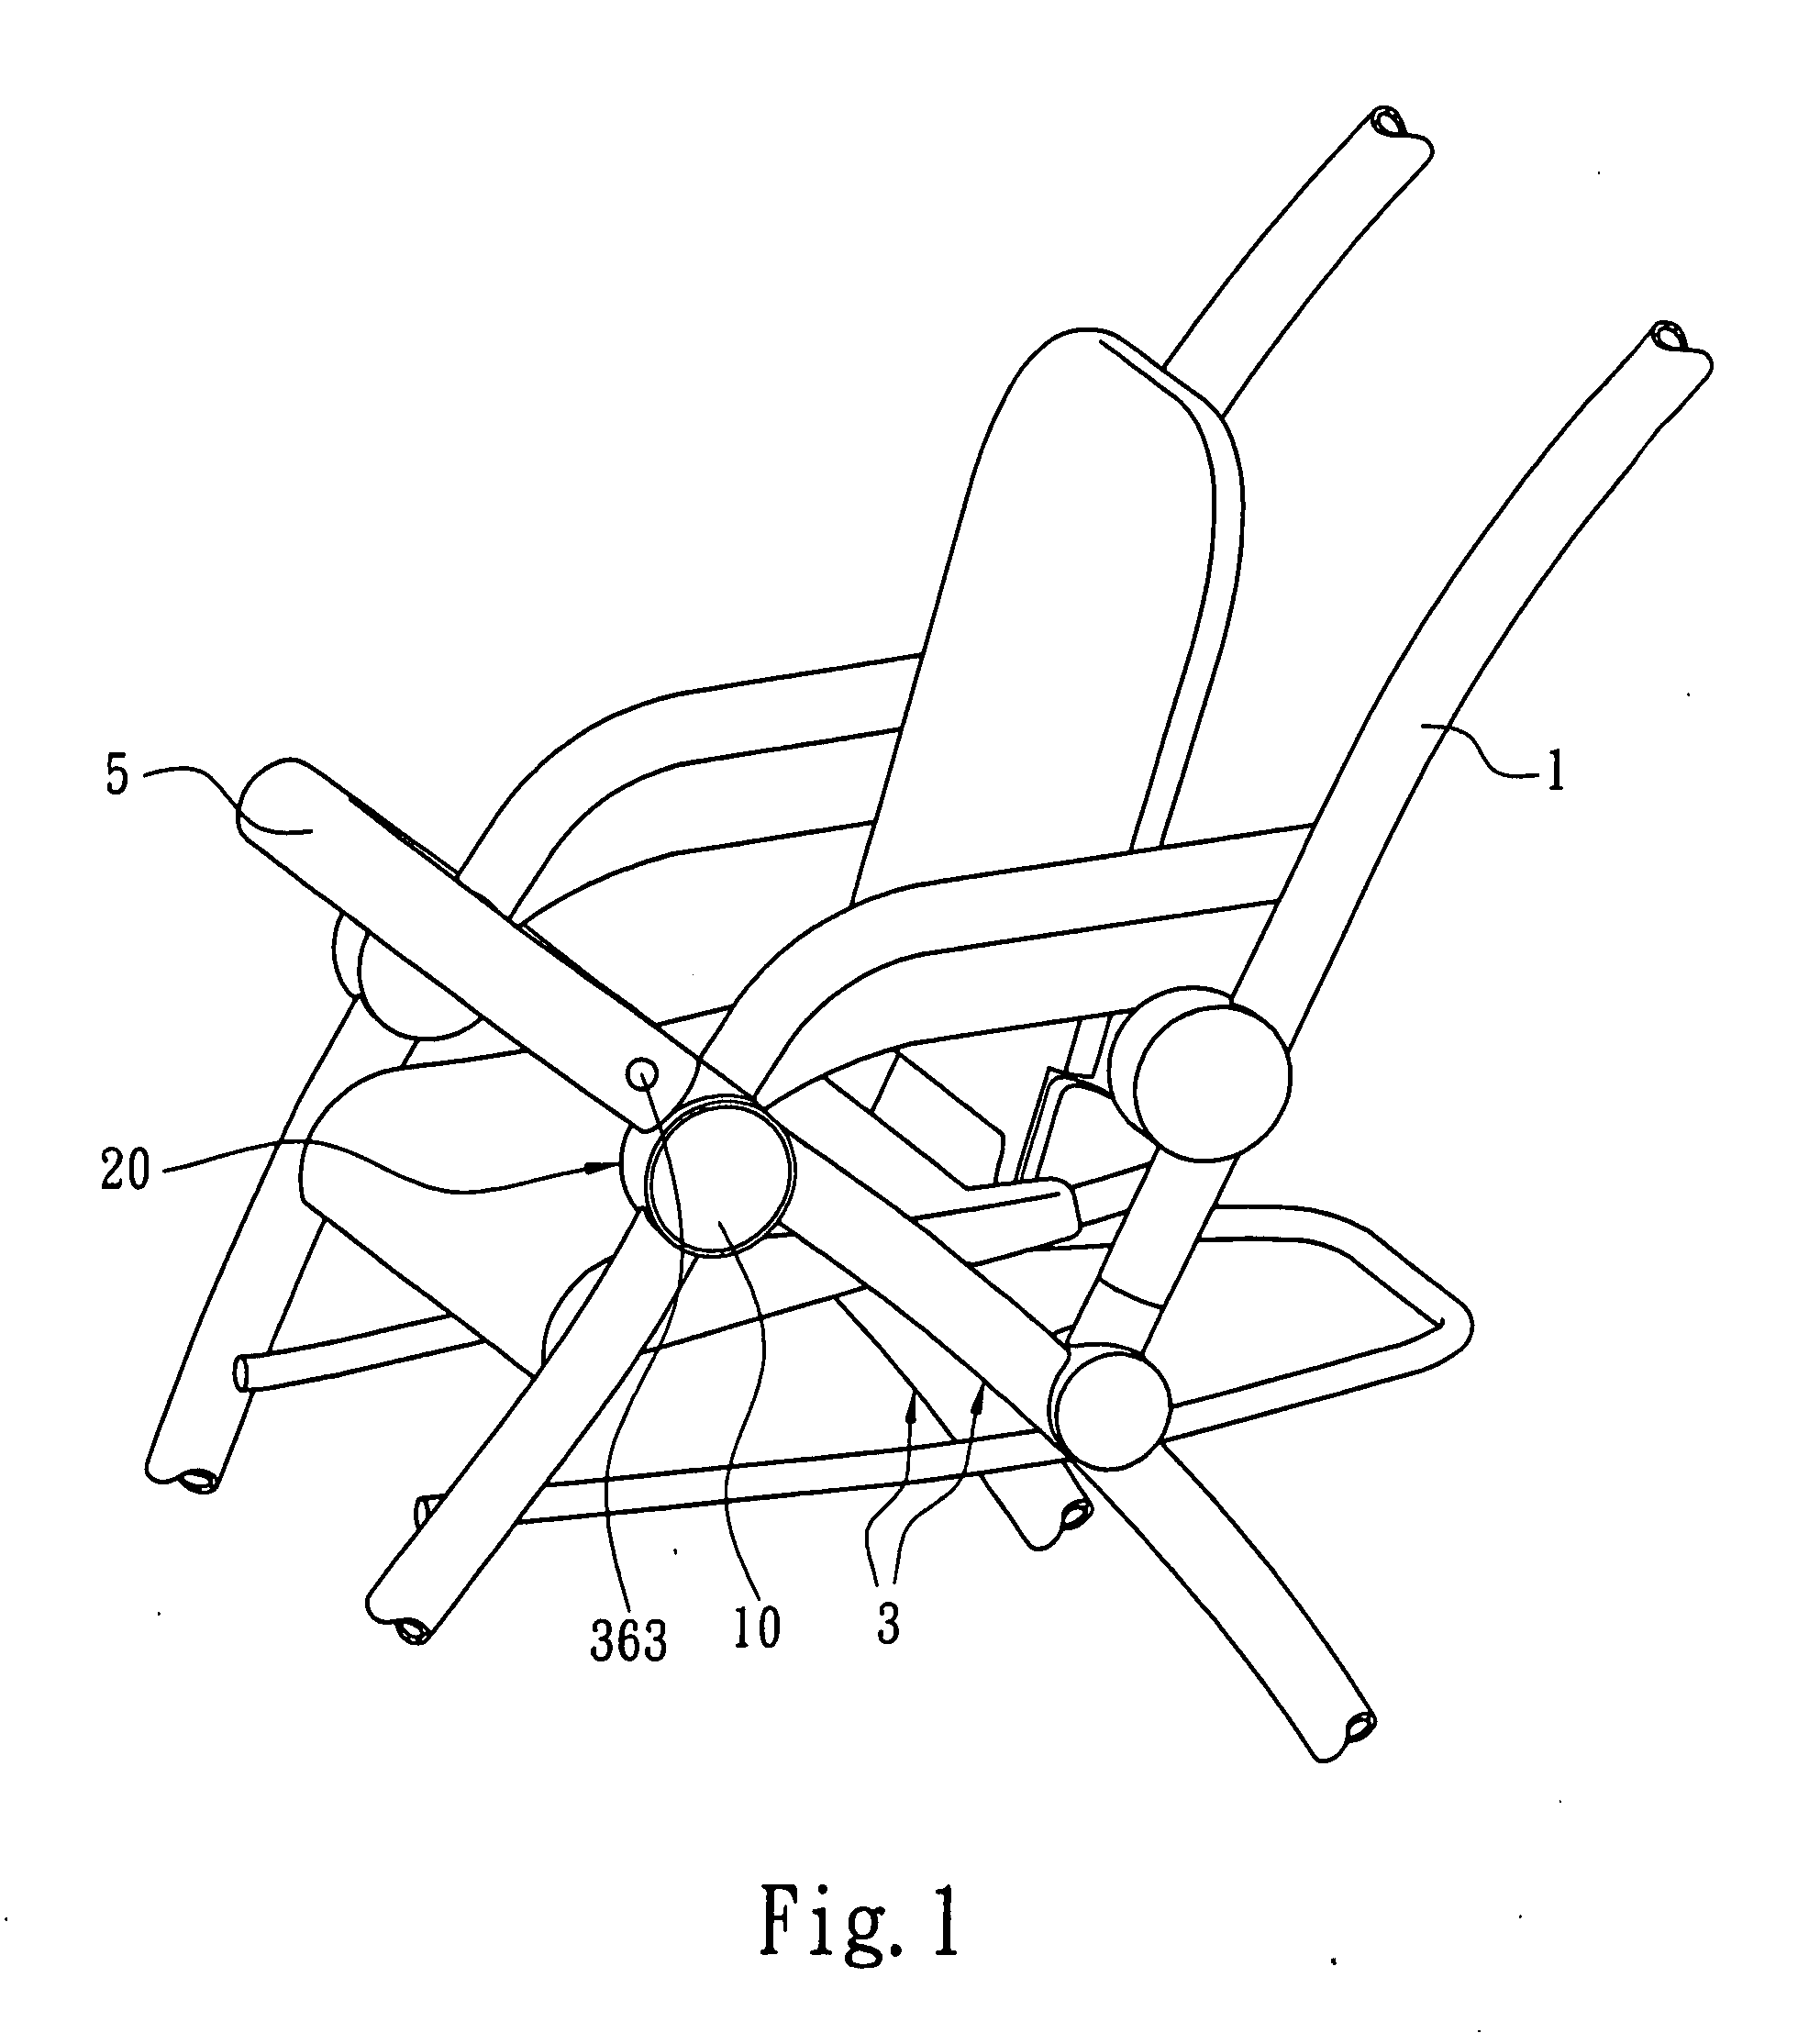 Safety guard mounting/dismounting device for a baby seat